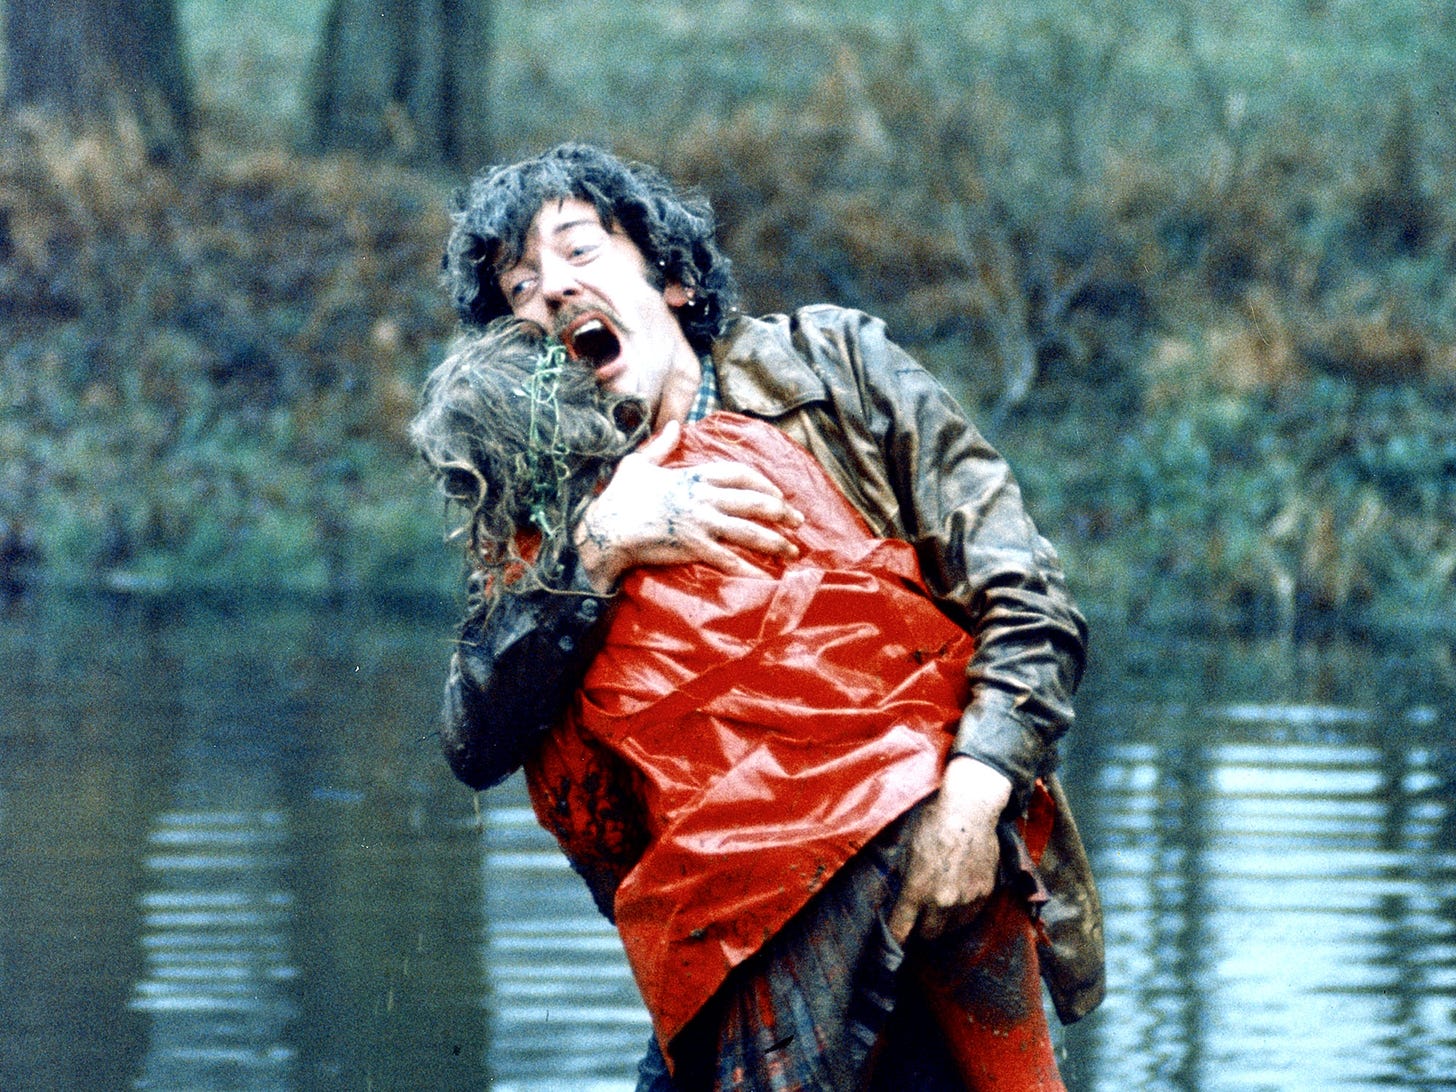 Don't Look Now review – Nic Roeg's horror classic returns to cinemas